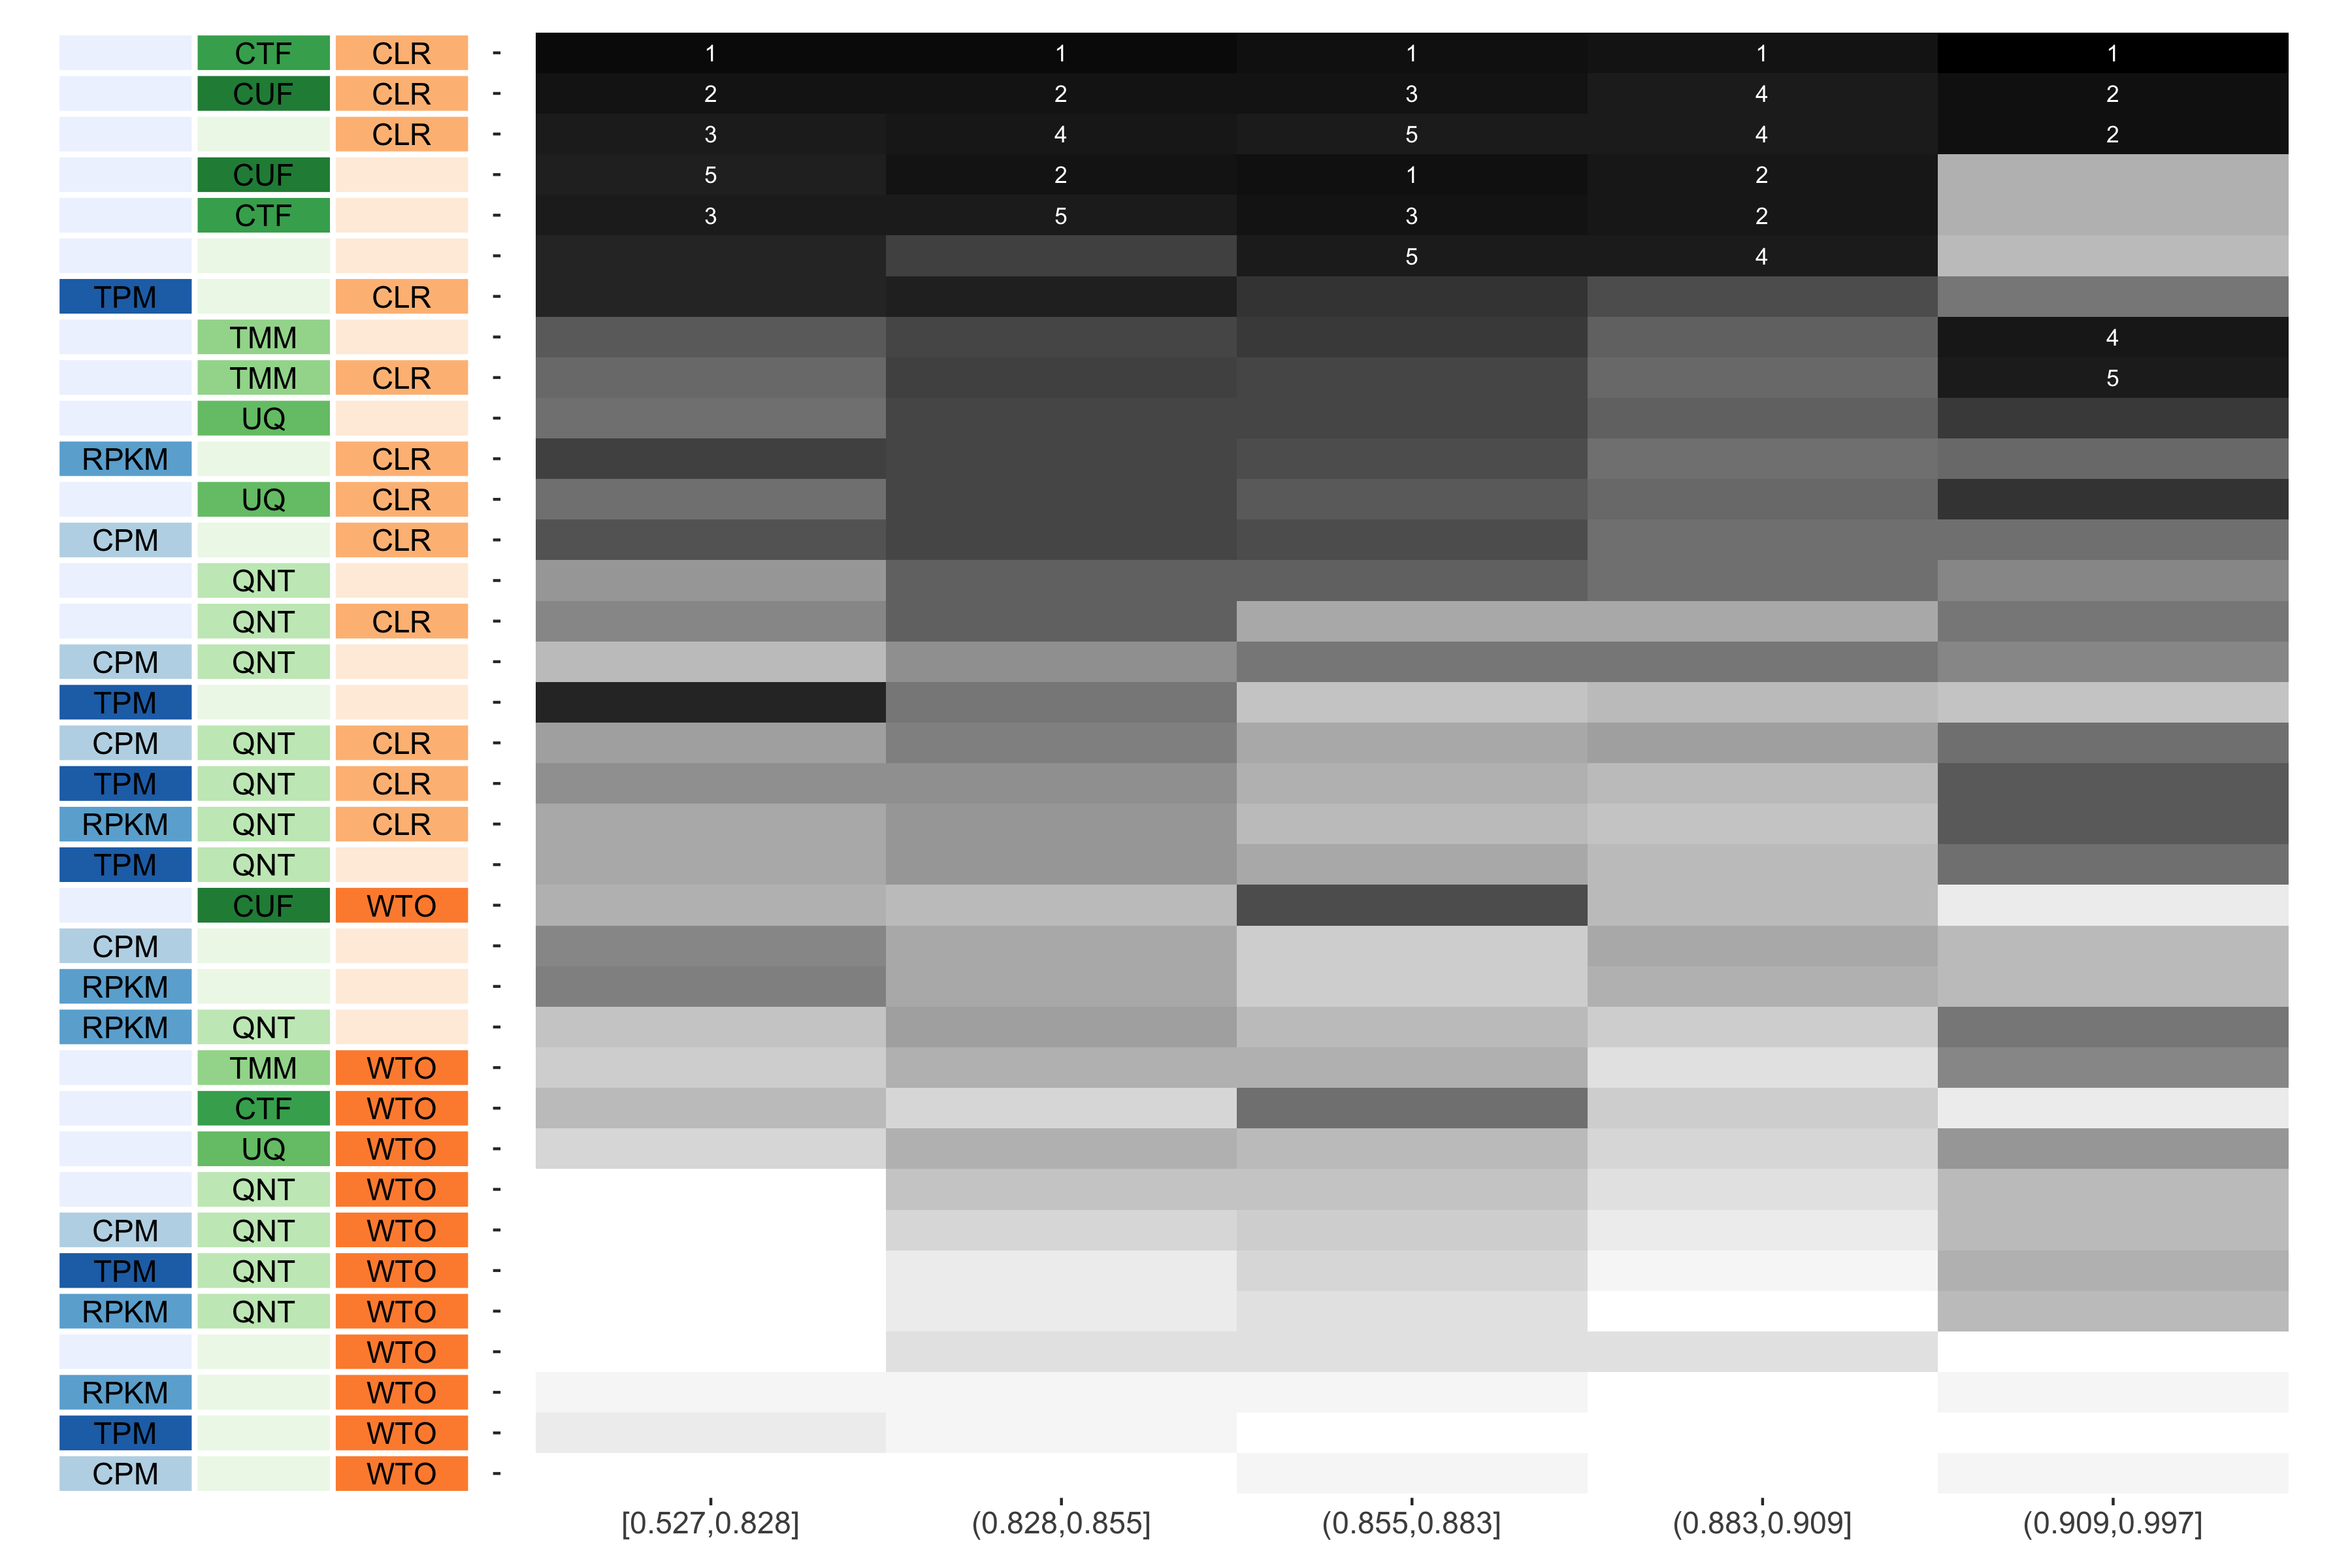 The heatmap shows the number of times (cell color) each workflow (row) outperforms other workflows as sample similarity varies (columns), when the resulting coexpression networks are evaluated based on the tissue-aware gold standard. The darkest colors indicate workflows that are significantly better than the most other workflows. In addition, the top 5 workflows in each column are marked with their rank, with ties given minimum rank.